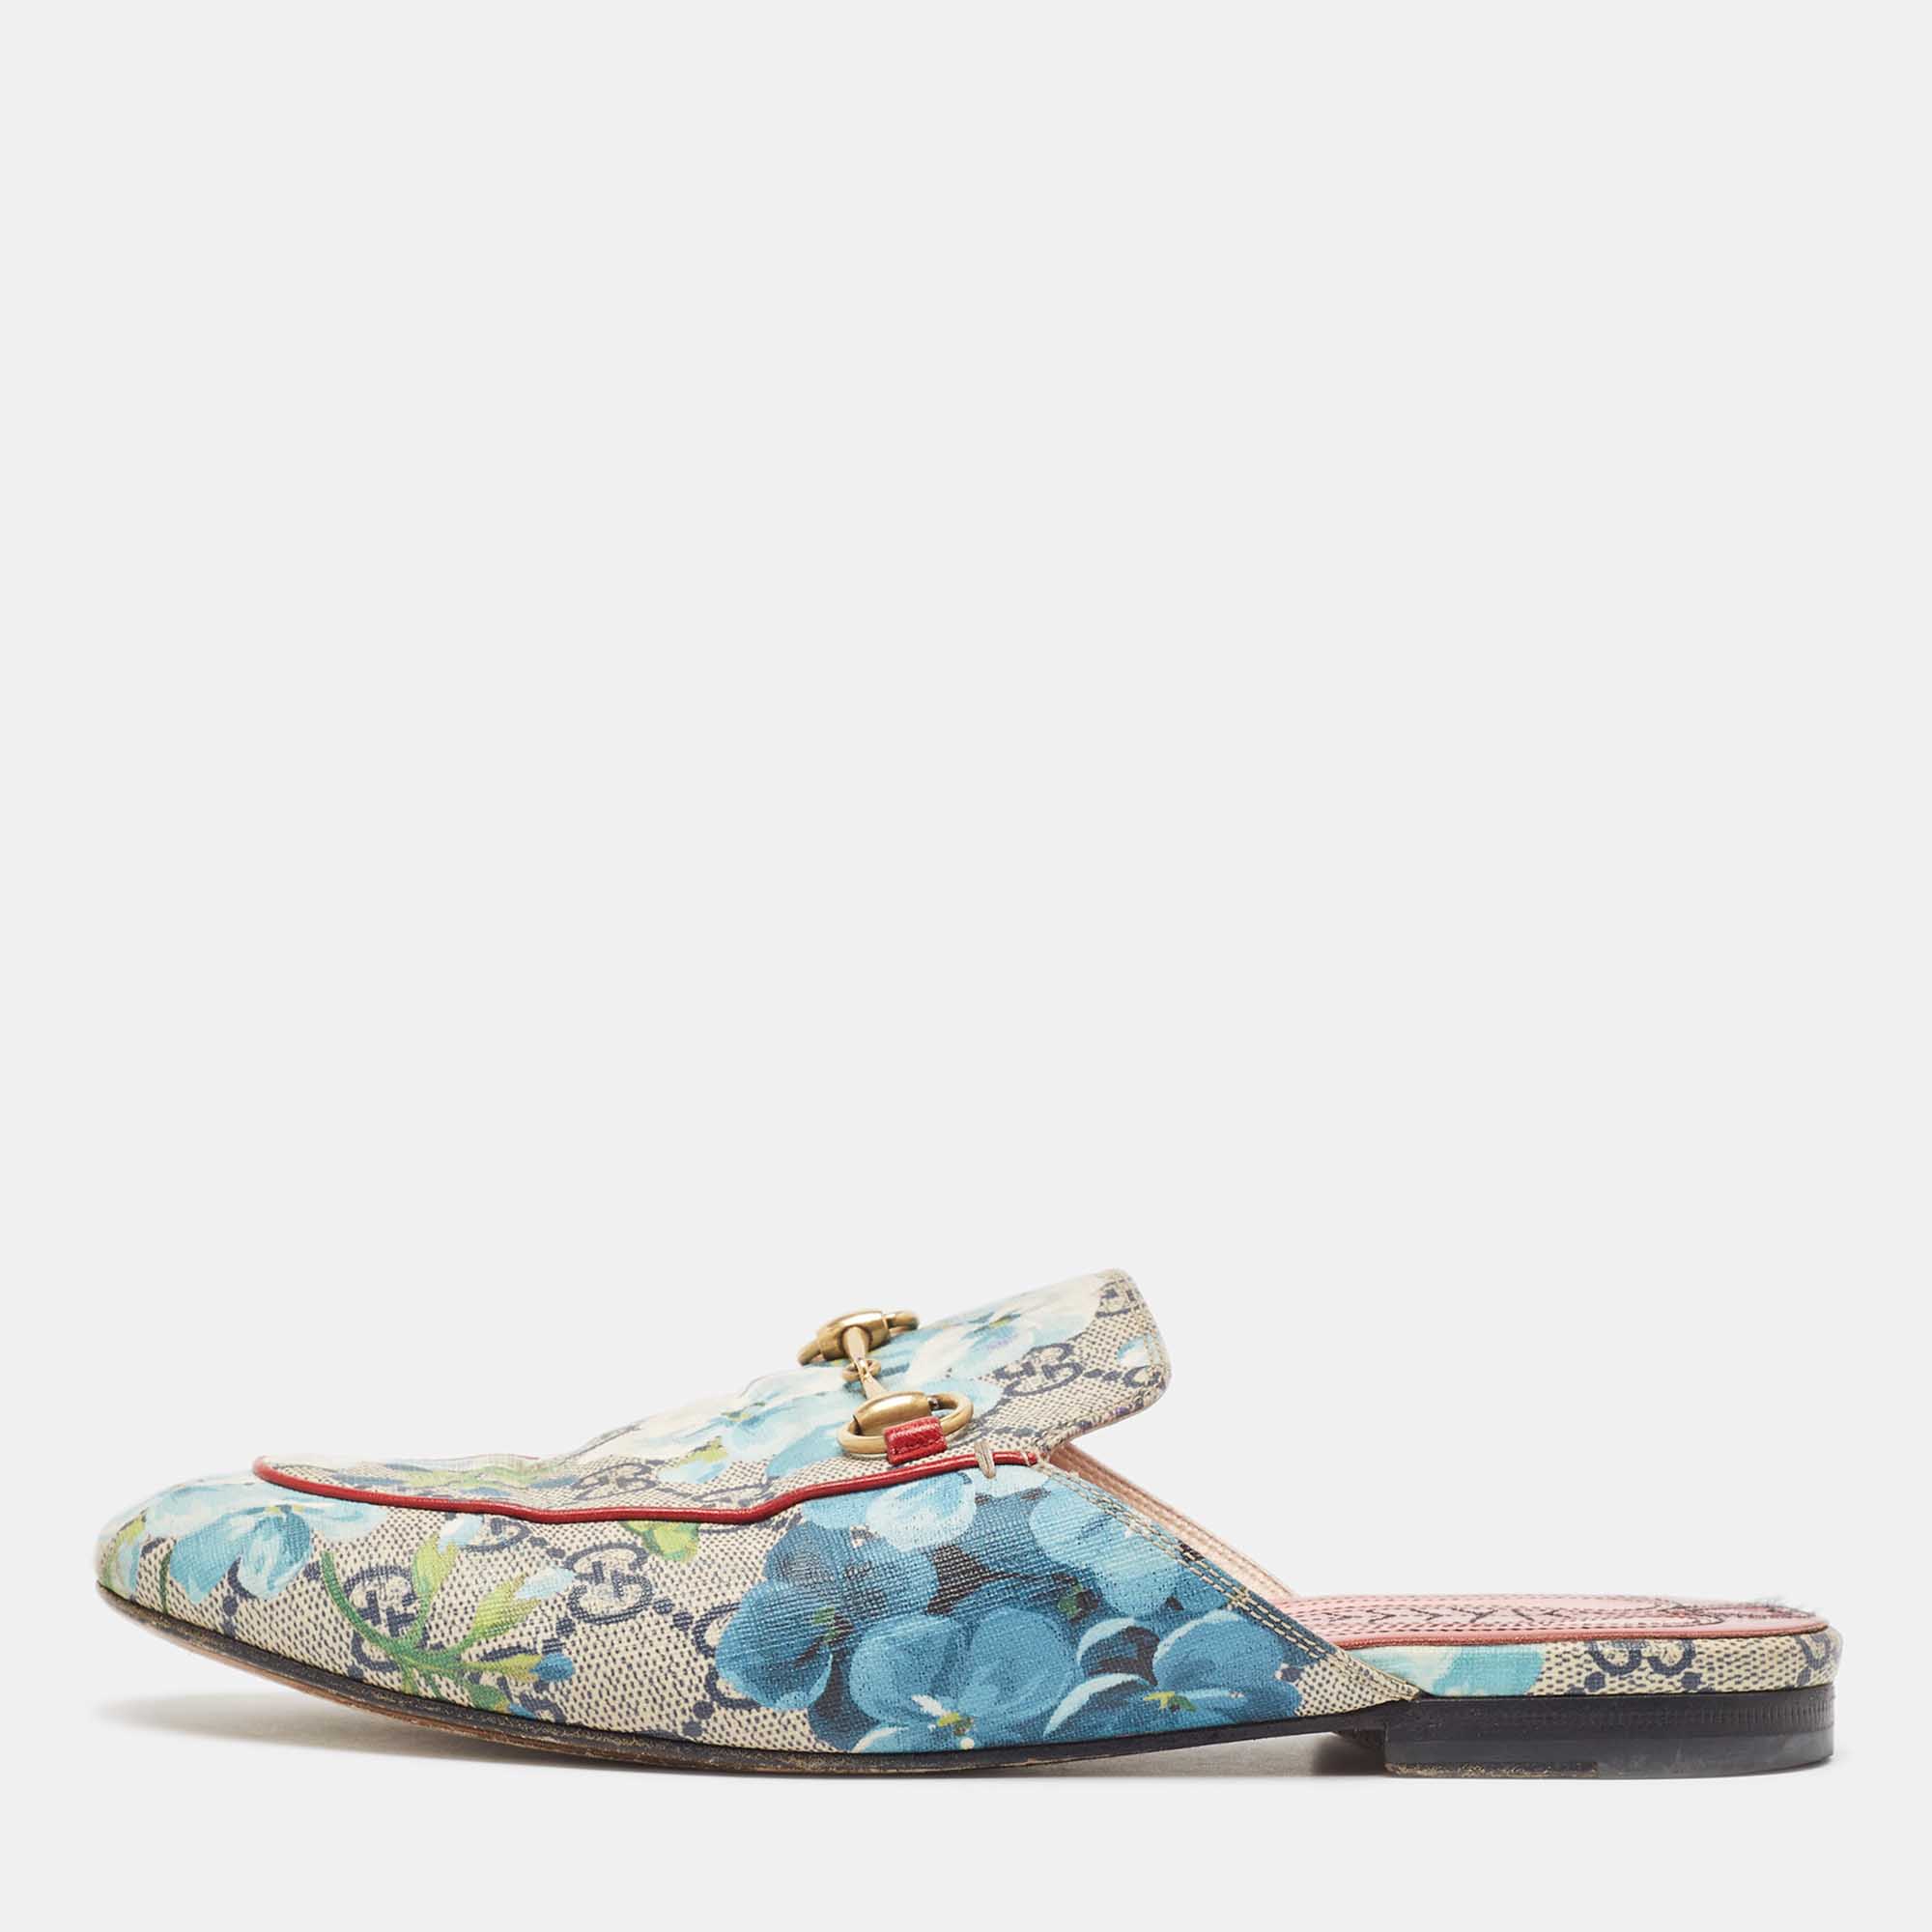 Pre-owned Gucci Blue Gg Supreme Canvas Blooms Horsebit Flat Mules Size 37